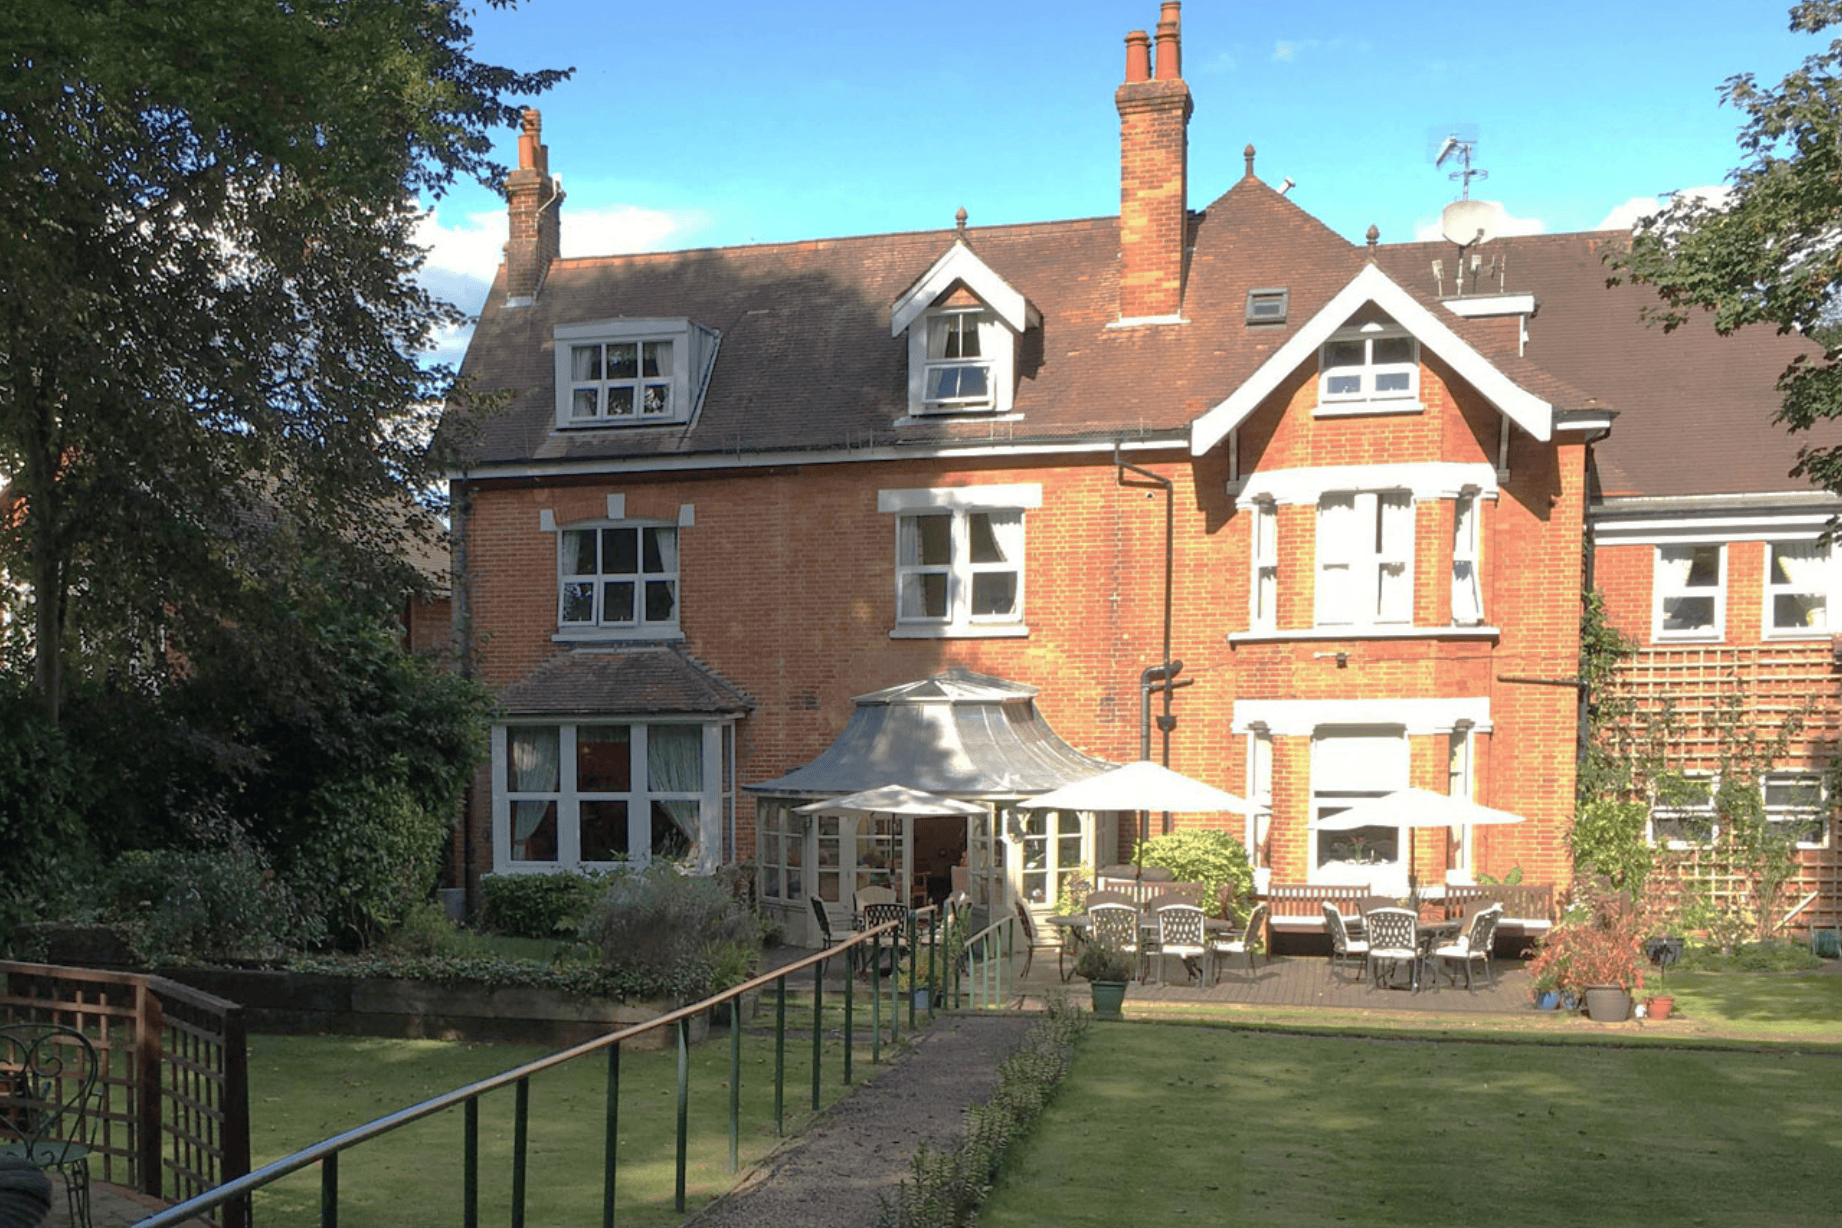 Exterior of Priors Mead Care Home in Reigate, Surrey